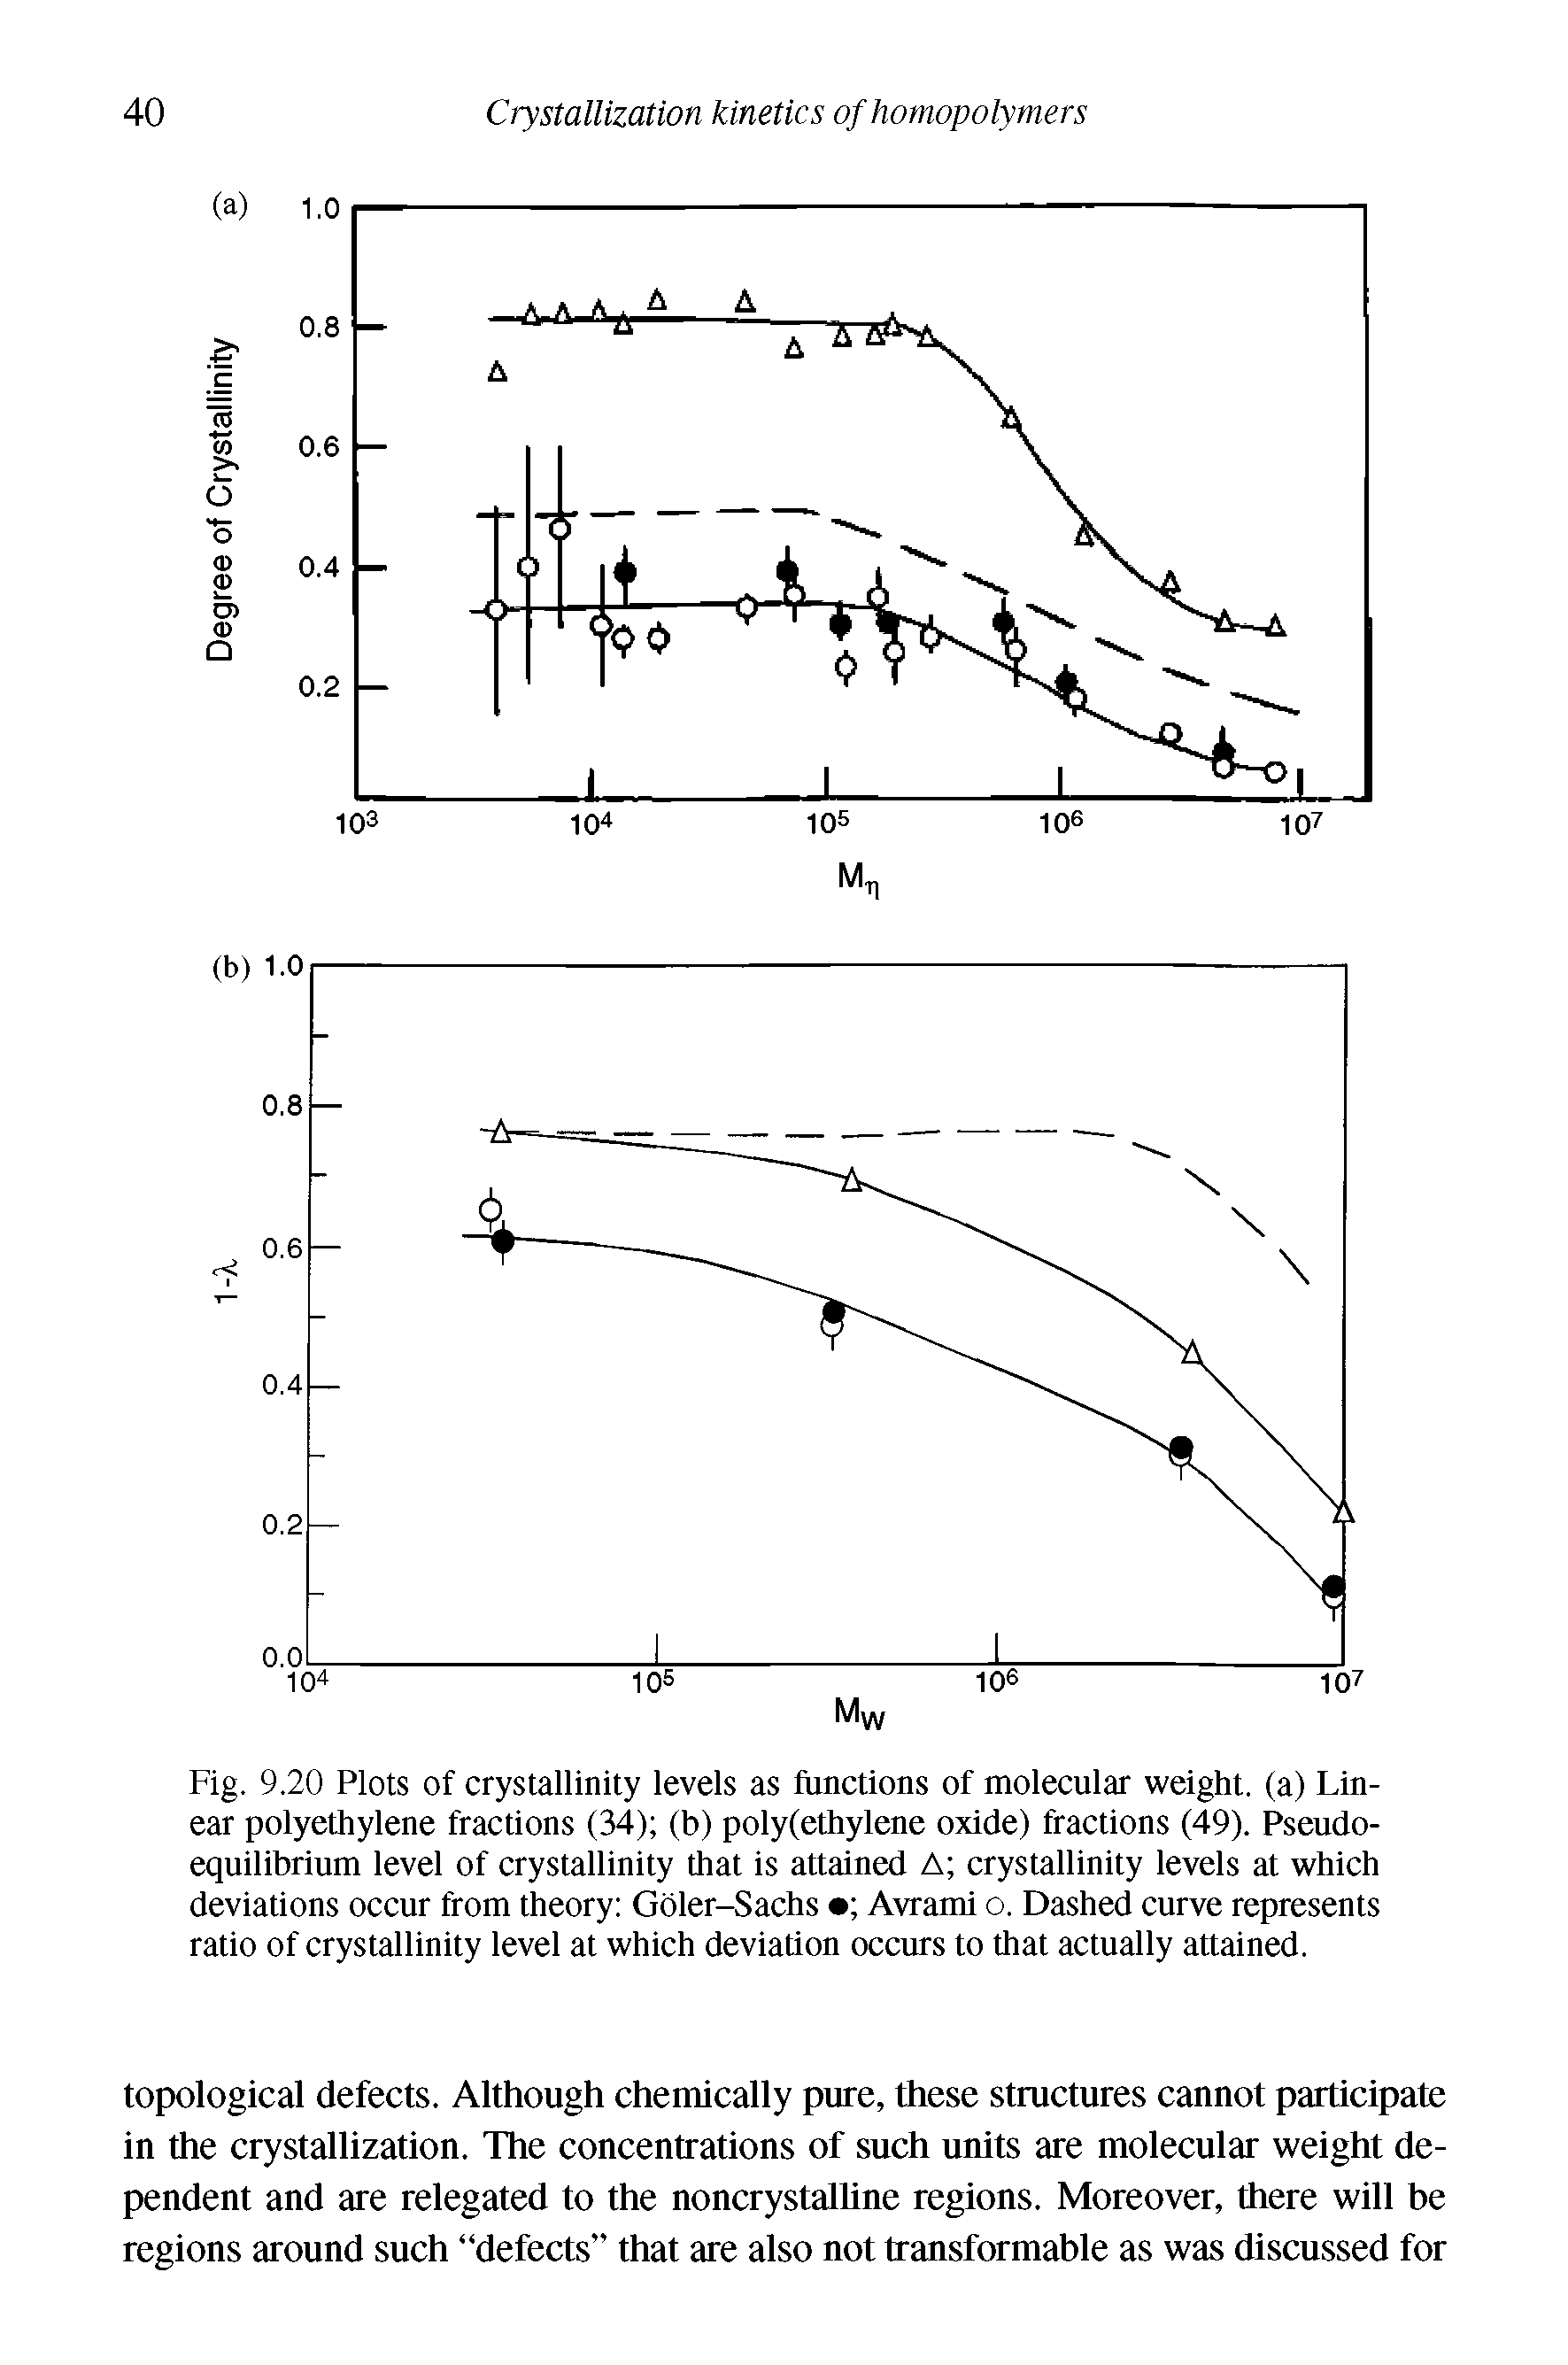 Fig. 9.20 Plots of crystallinity levels as functions of molecular weight, (a) Linear polyethylene fractions (34) (b) poly(ethylene oxide) fractions (49). Pseudoequilibrium level of crystallinity that is attained A crystallinity levels at which deviations occur from theory Goler-Sachs Avrami o. Dashed curve represents ratio of crystallinity level at which deviation occurs to that actually attained.